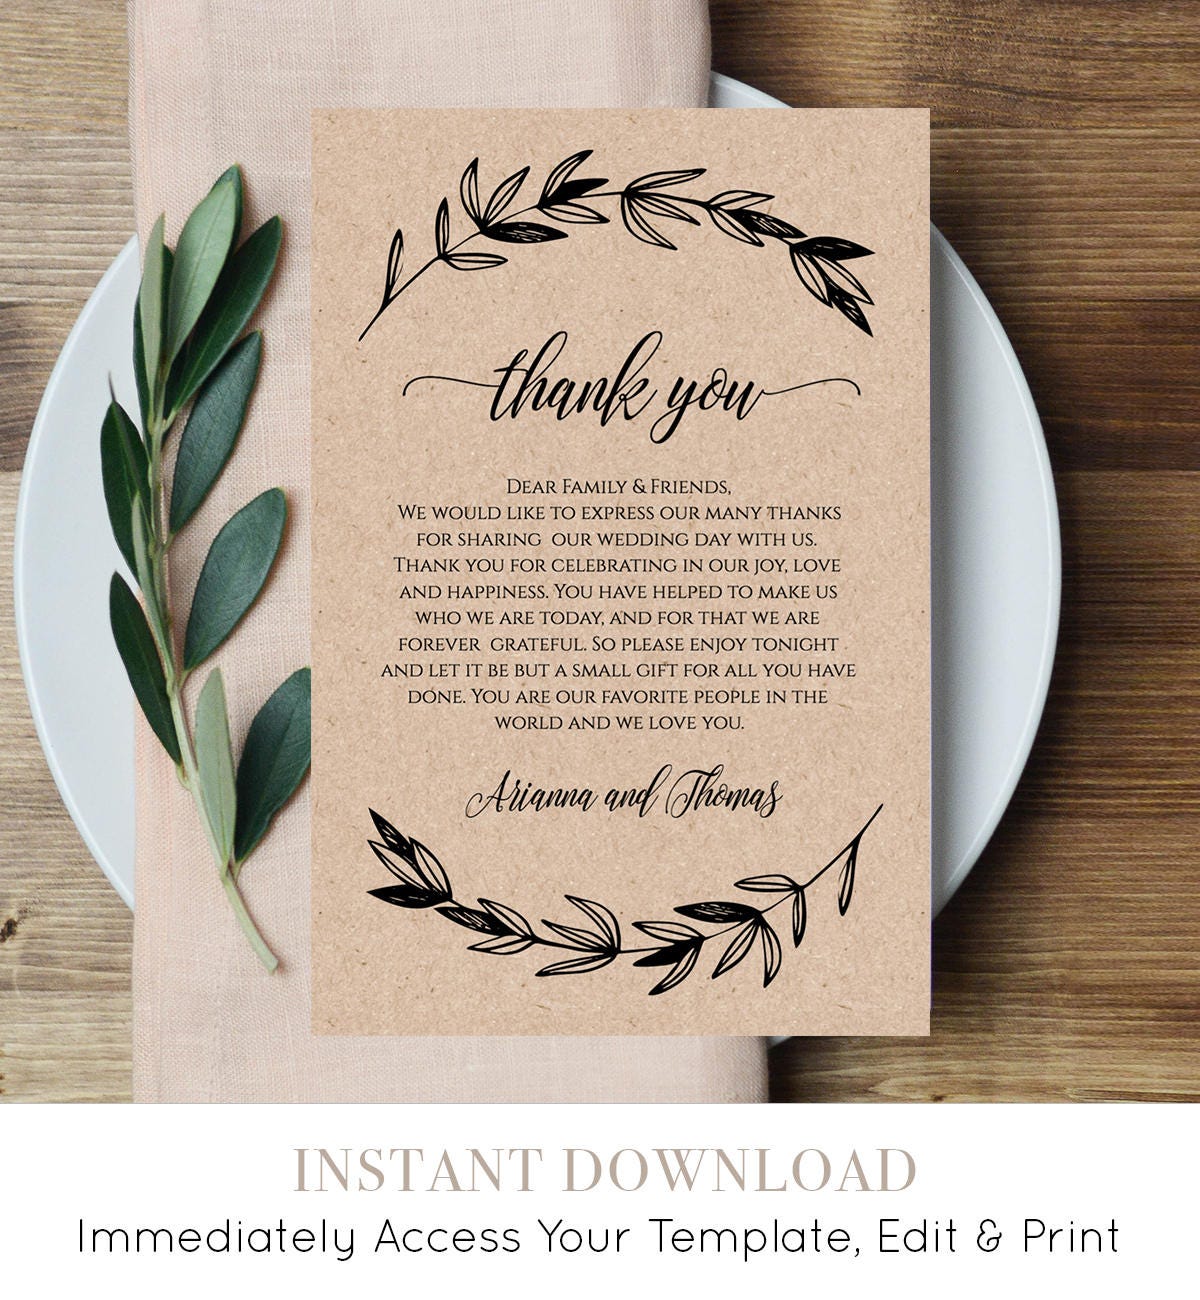 view-how-to-thank-for-wedding-invitation-pics-rockchalkjay